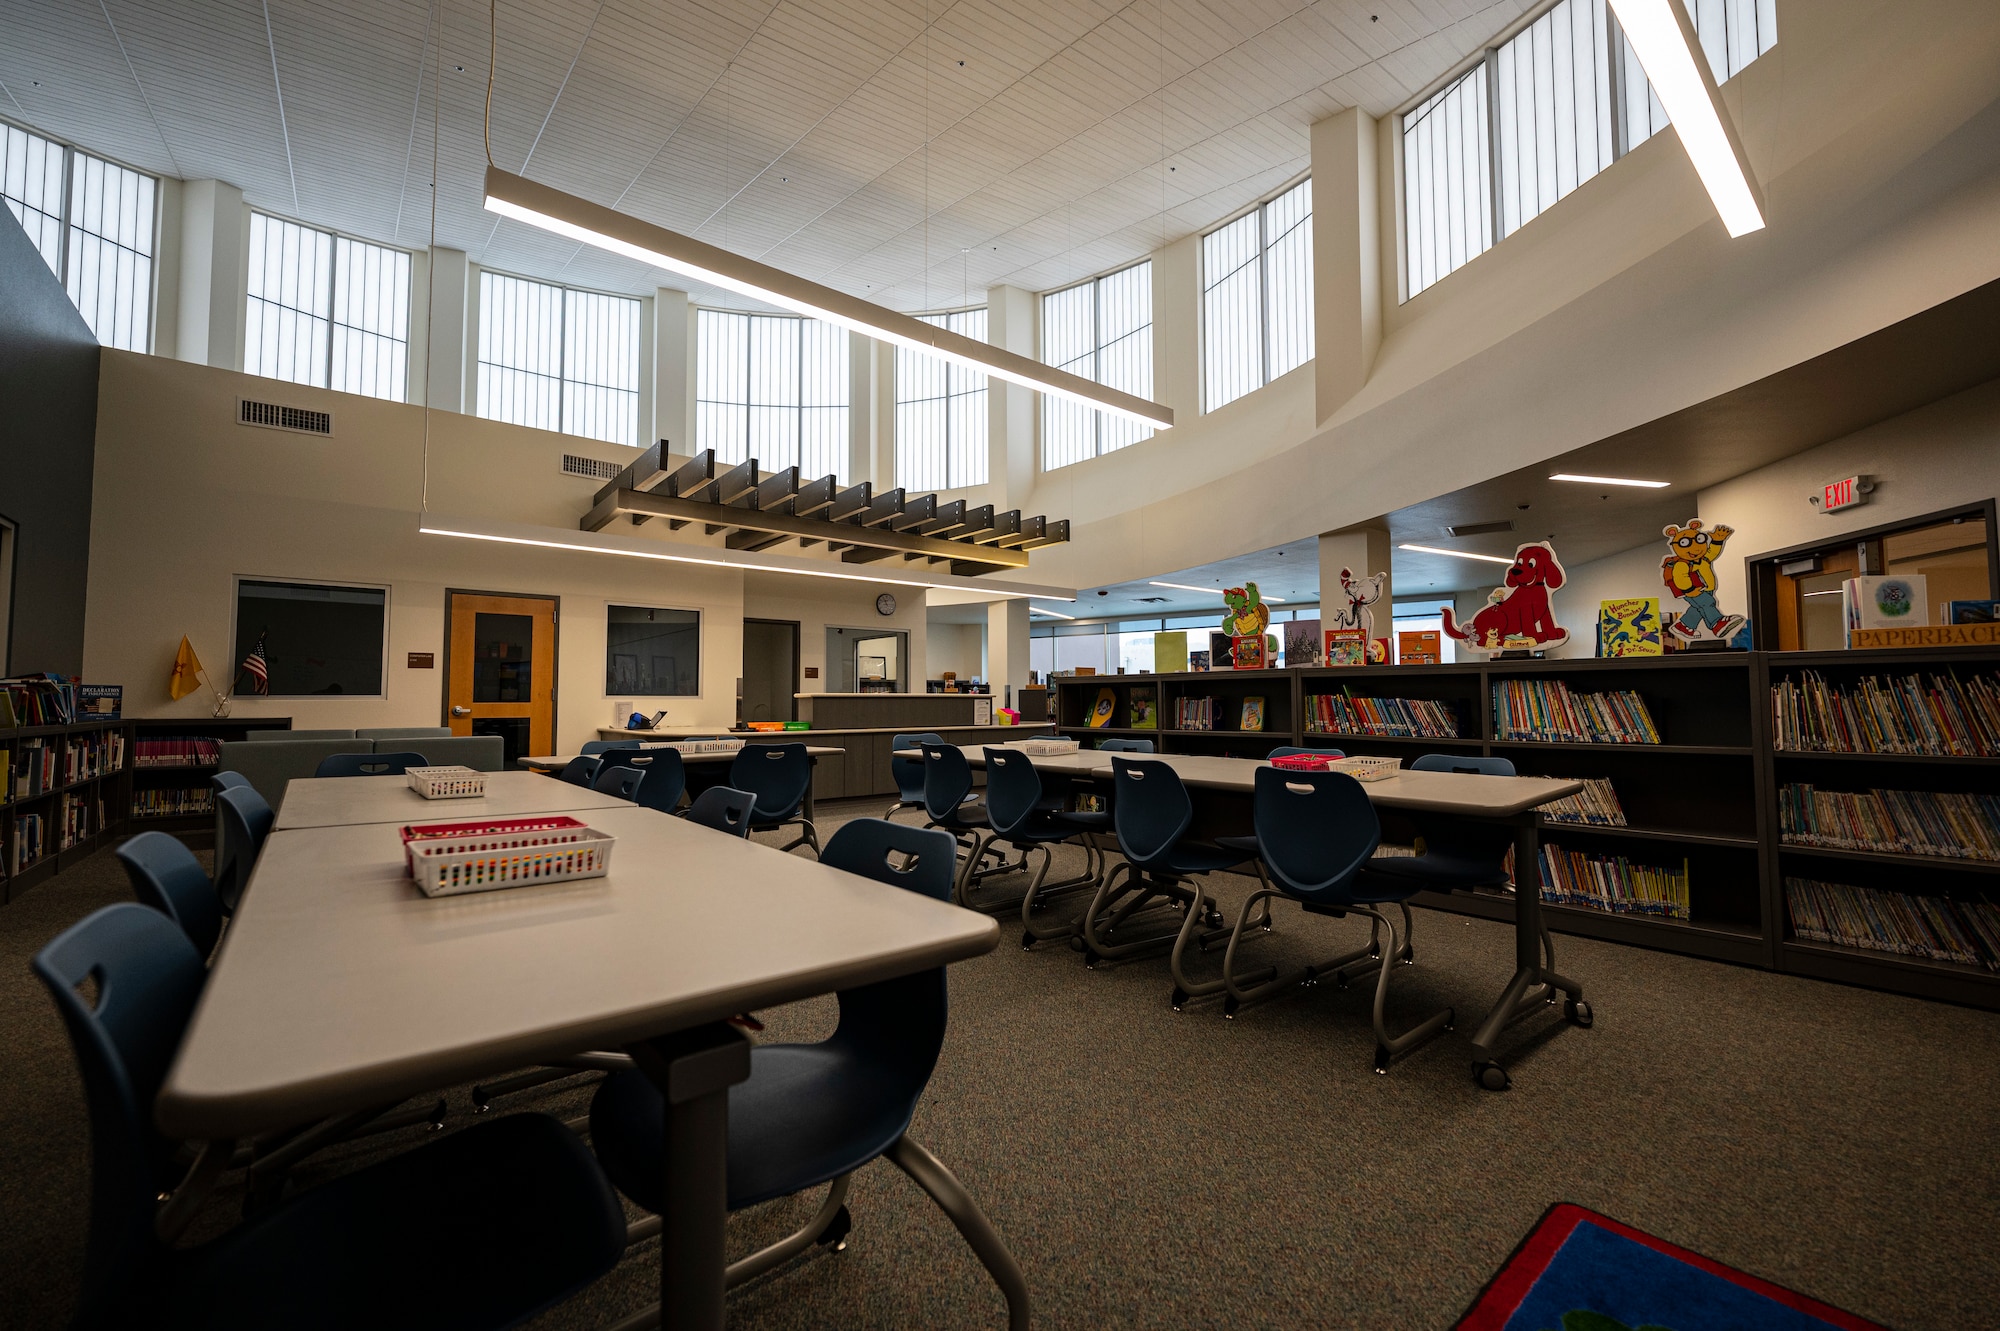 The Holloman Elementary School library in New Mexico, Jan. 17, 2023. The new school has the capacity to support over 500 students, an increase from the previous facility. (U.S. Air Force photo by Airman 1st Class Isaiah Pedrazzini)